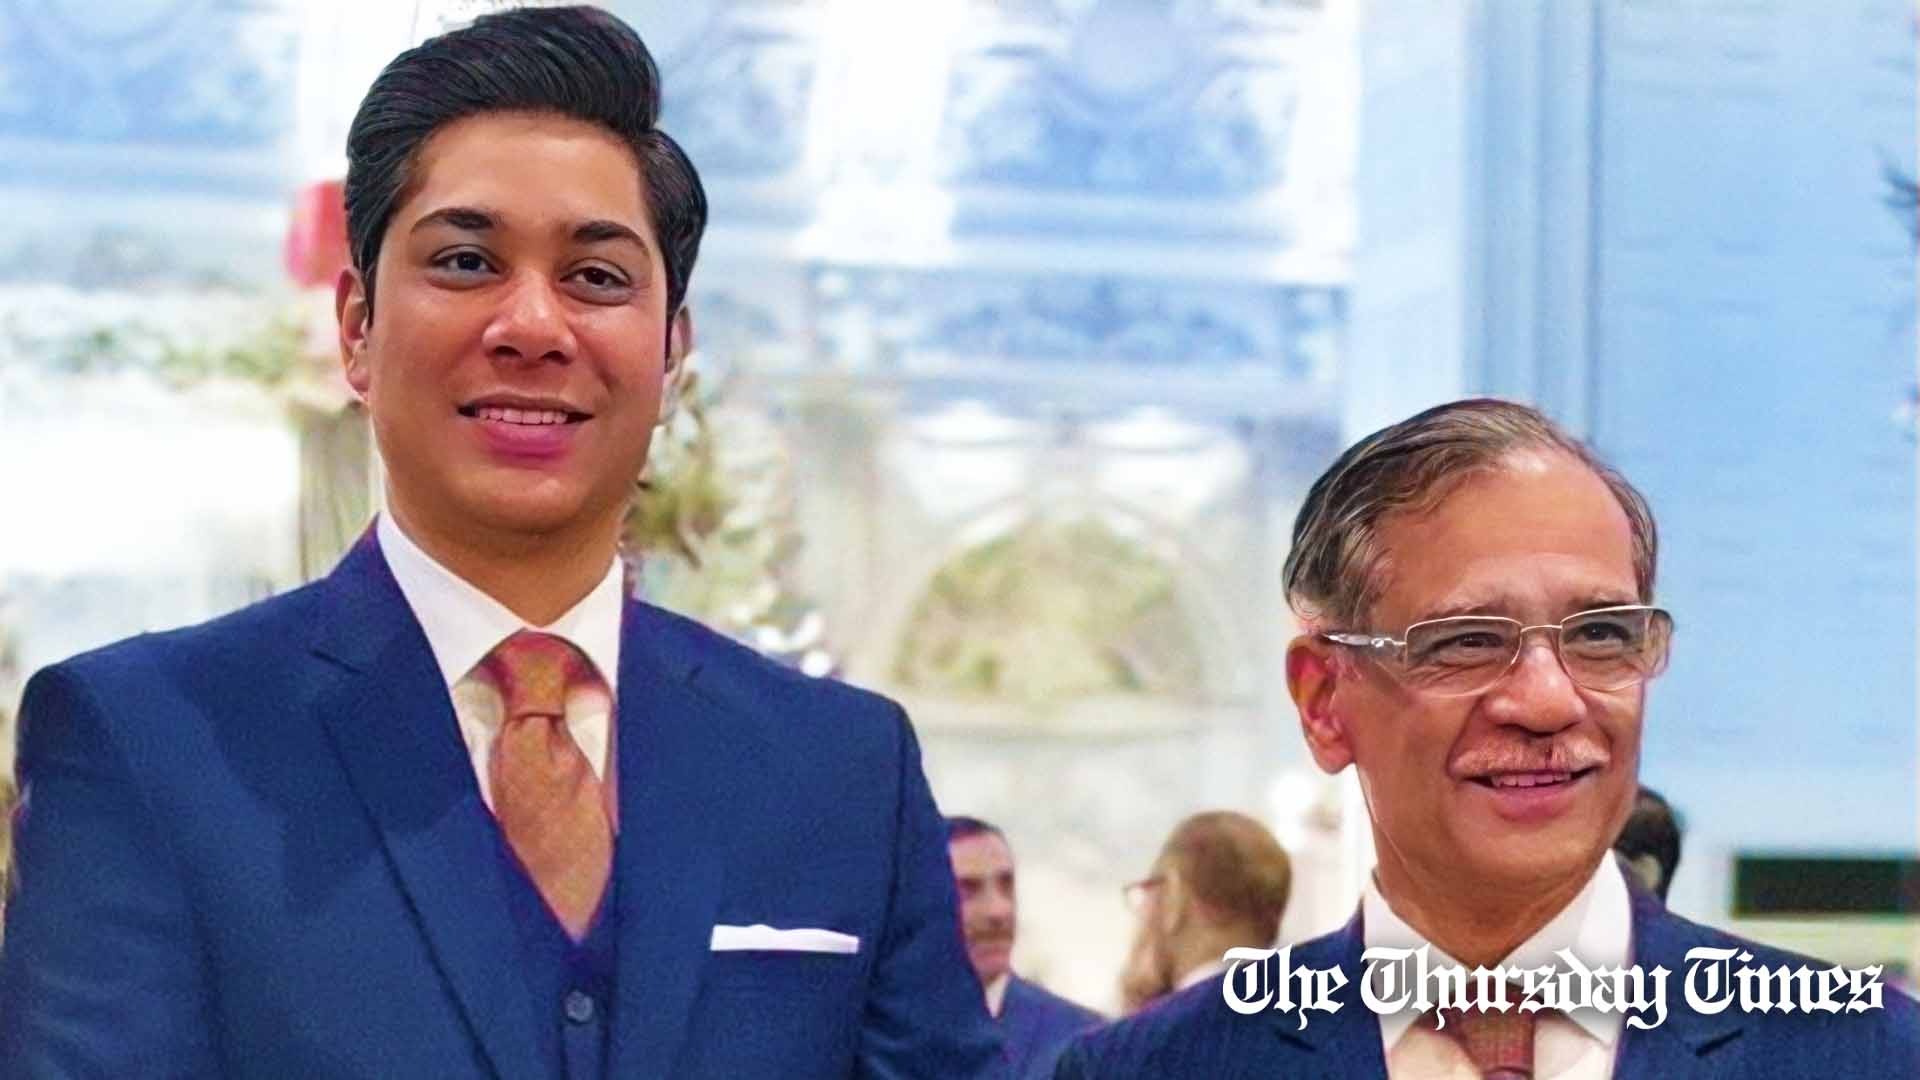 A file photo is shown of former Chief Justice Saqib Nisar alongside his son, Najam Saqib. — FILE/THE THURSDAY TIMES